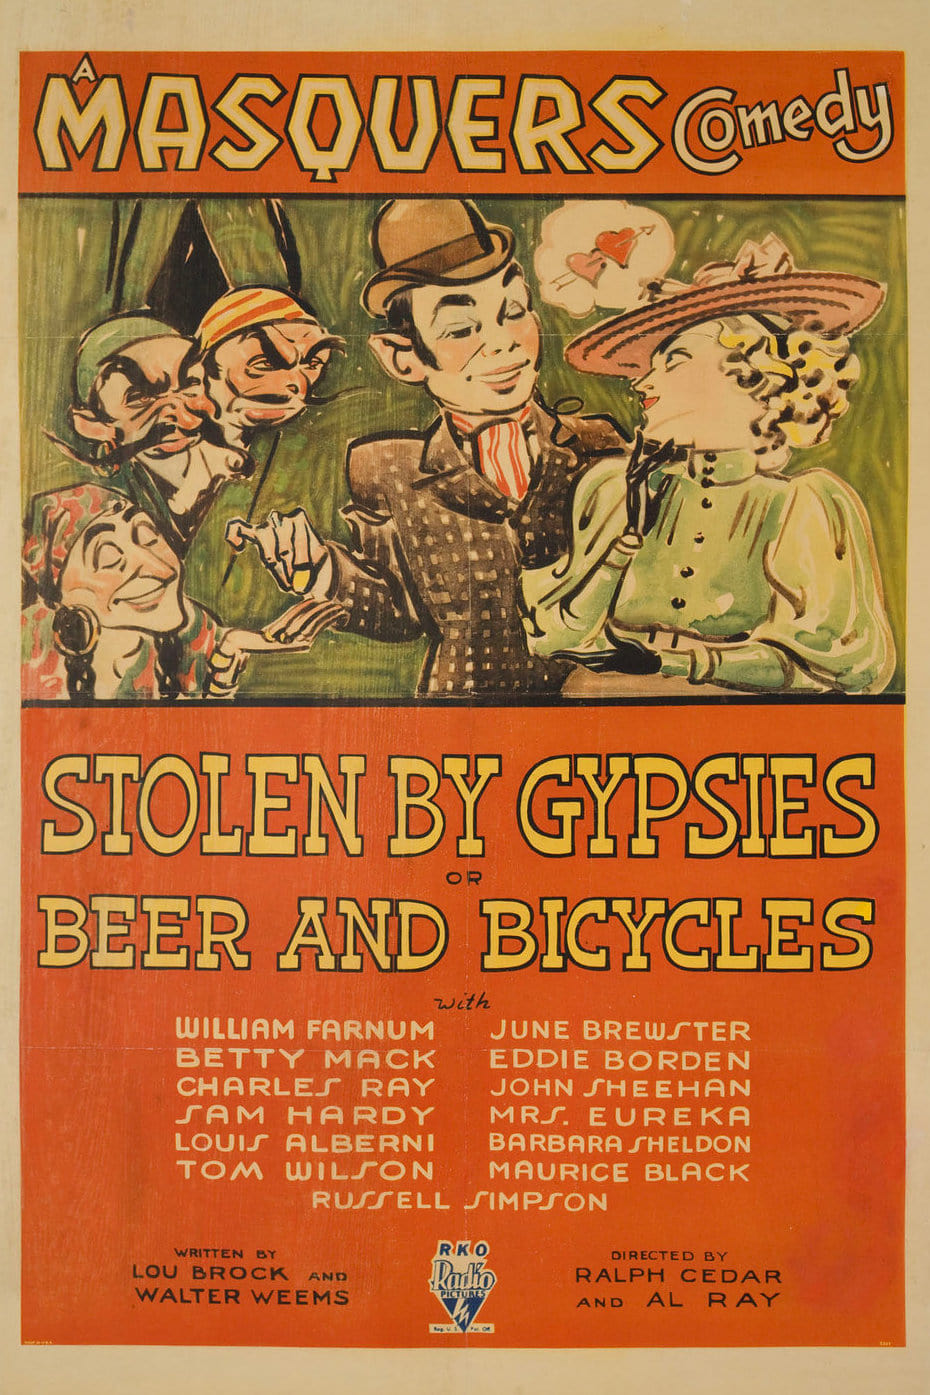 Stolen by Gypsies or Beer and Bicycles